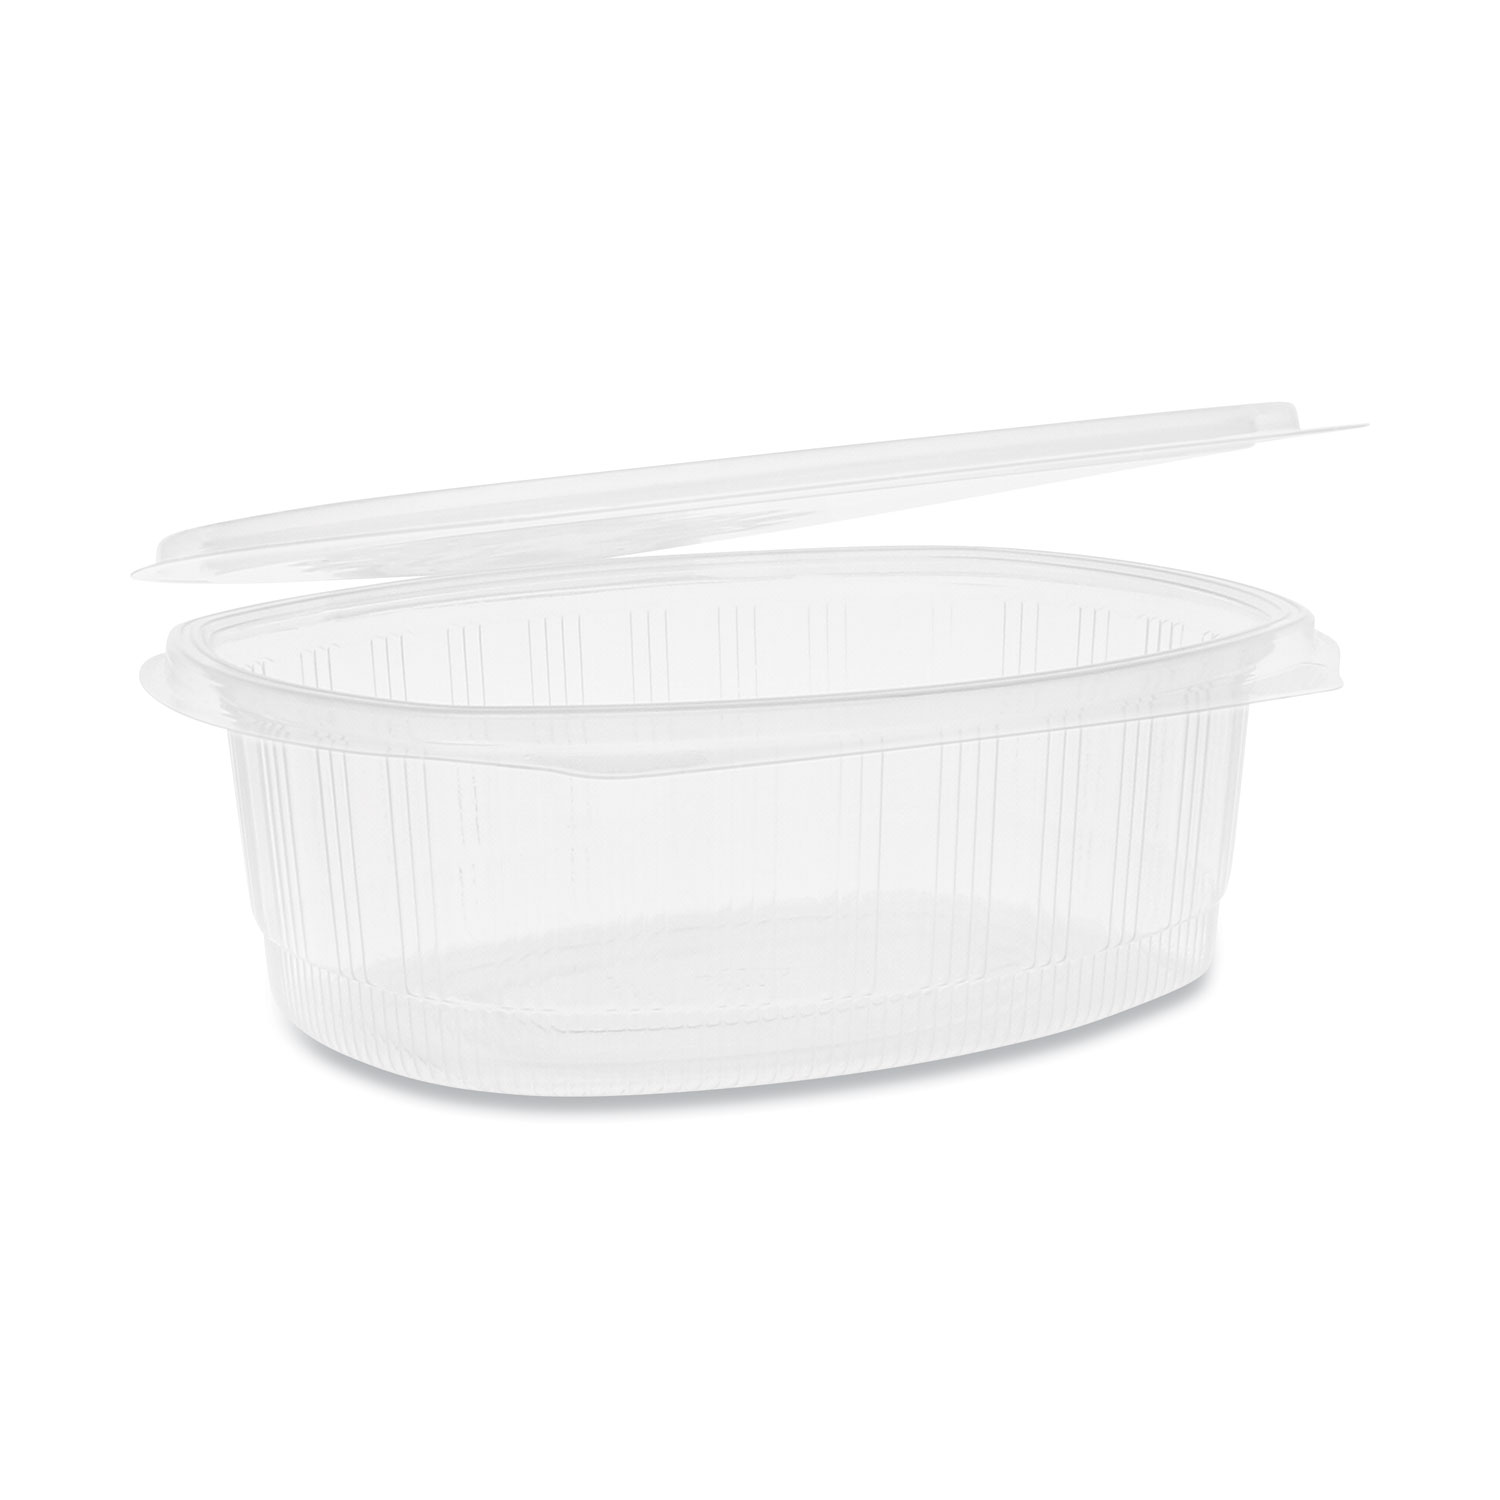 Pactiv EarthChoice PET Hinged Lid Deli Containers, 8.88 x 7.25 x 2.94, 48 oz, 1-Compartment, Clear, 190/Carton